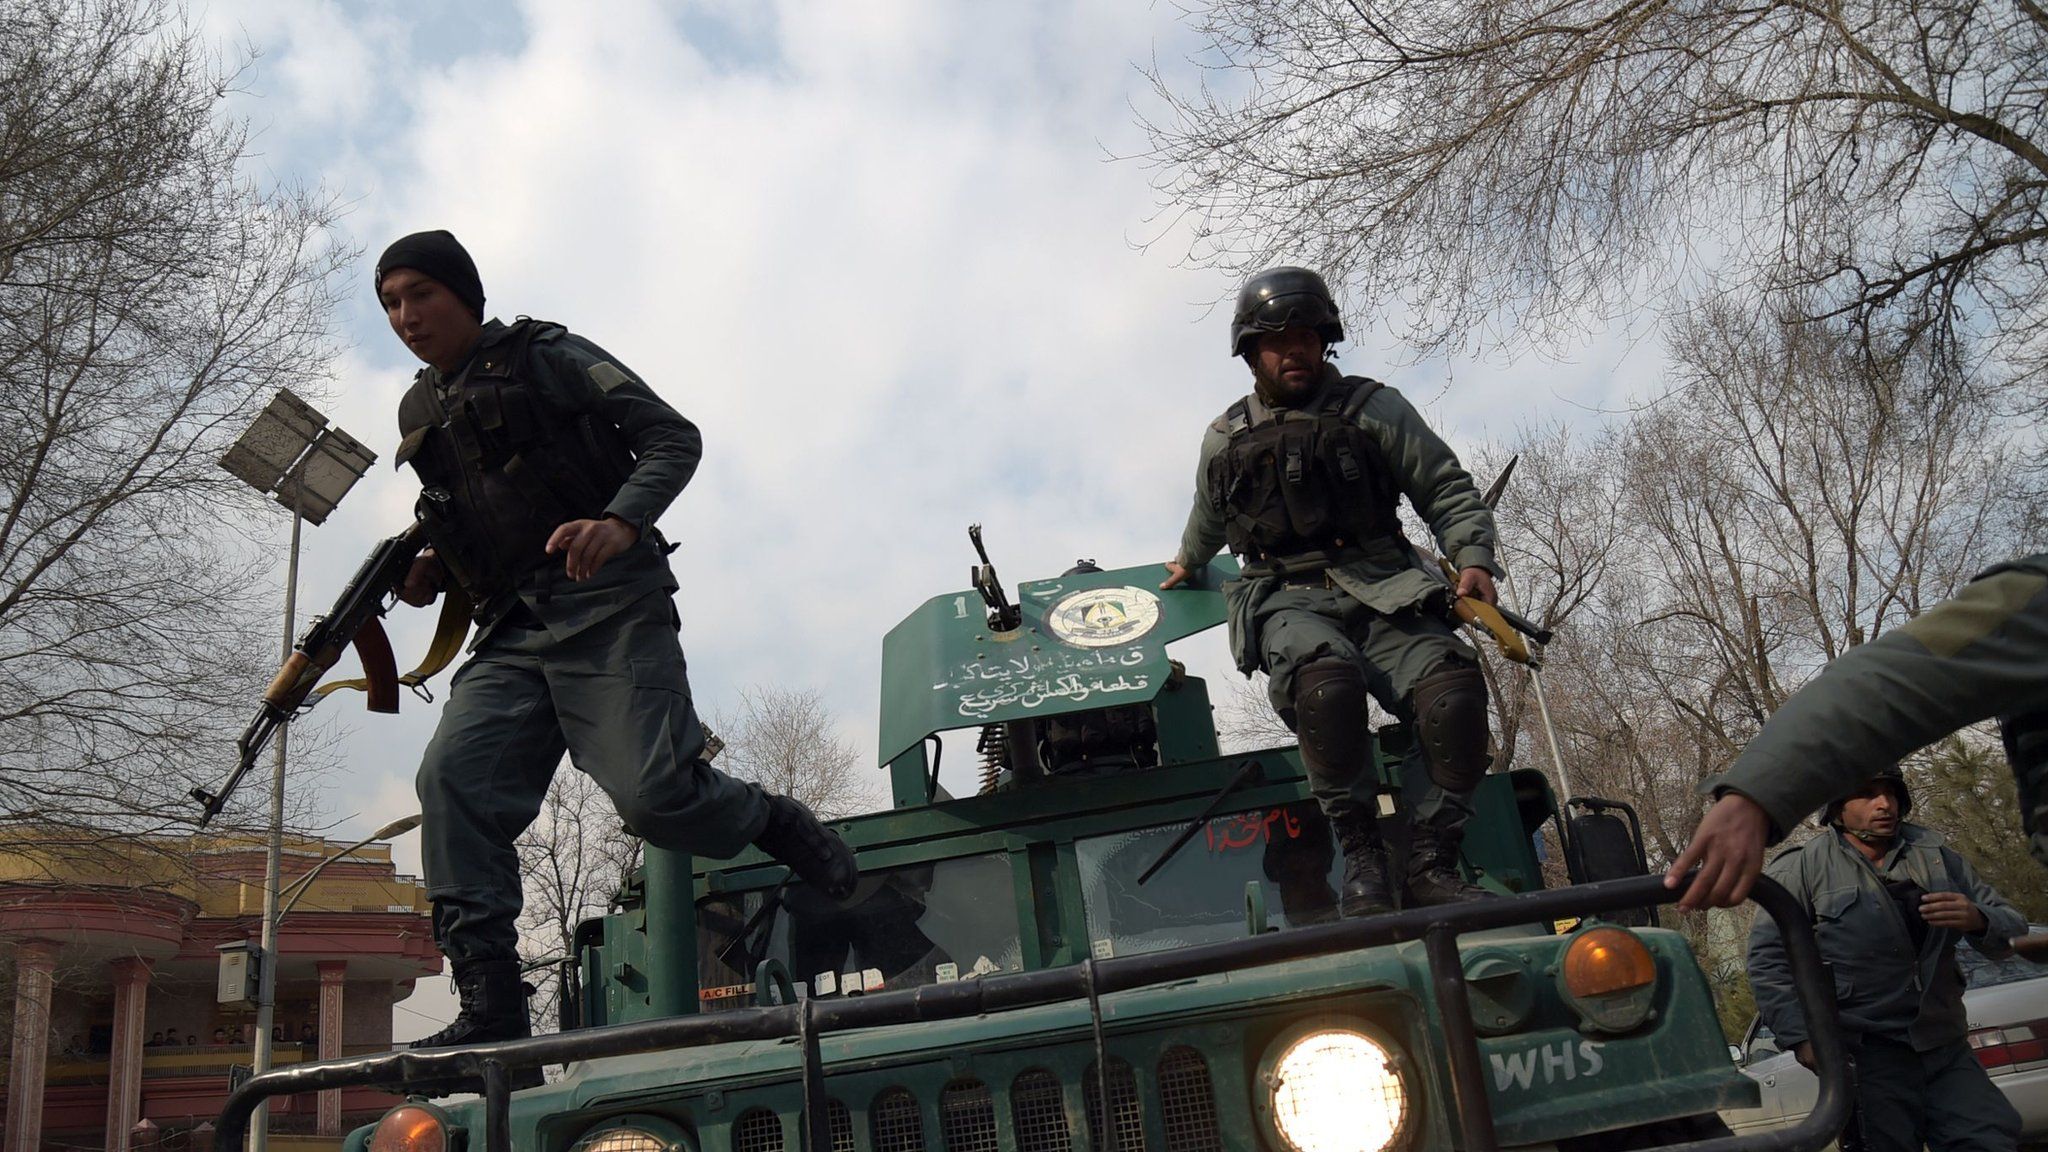 This file photo taken on 8 March 2017 shows Afghan policemen leaping from a vehicle as they arrive outside a military hospital during an attack in Kabul